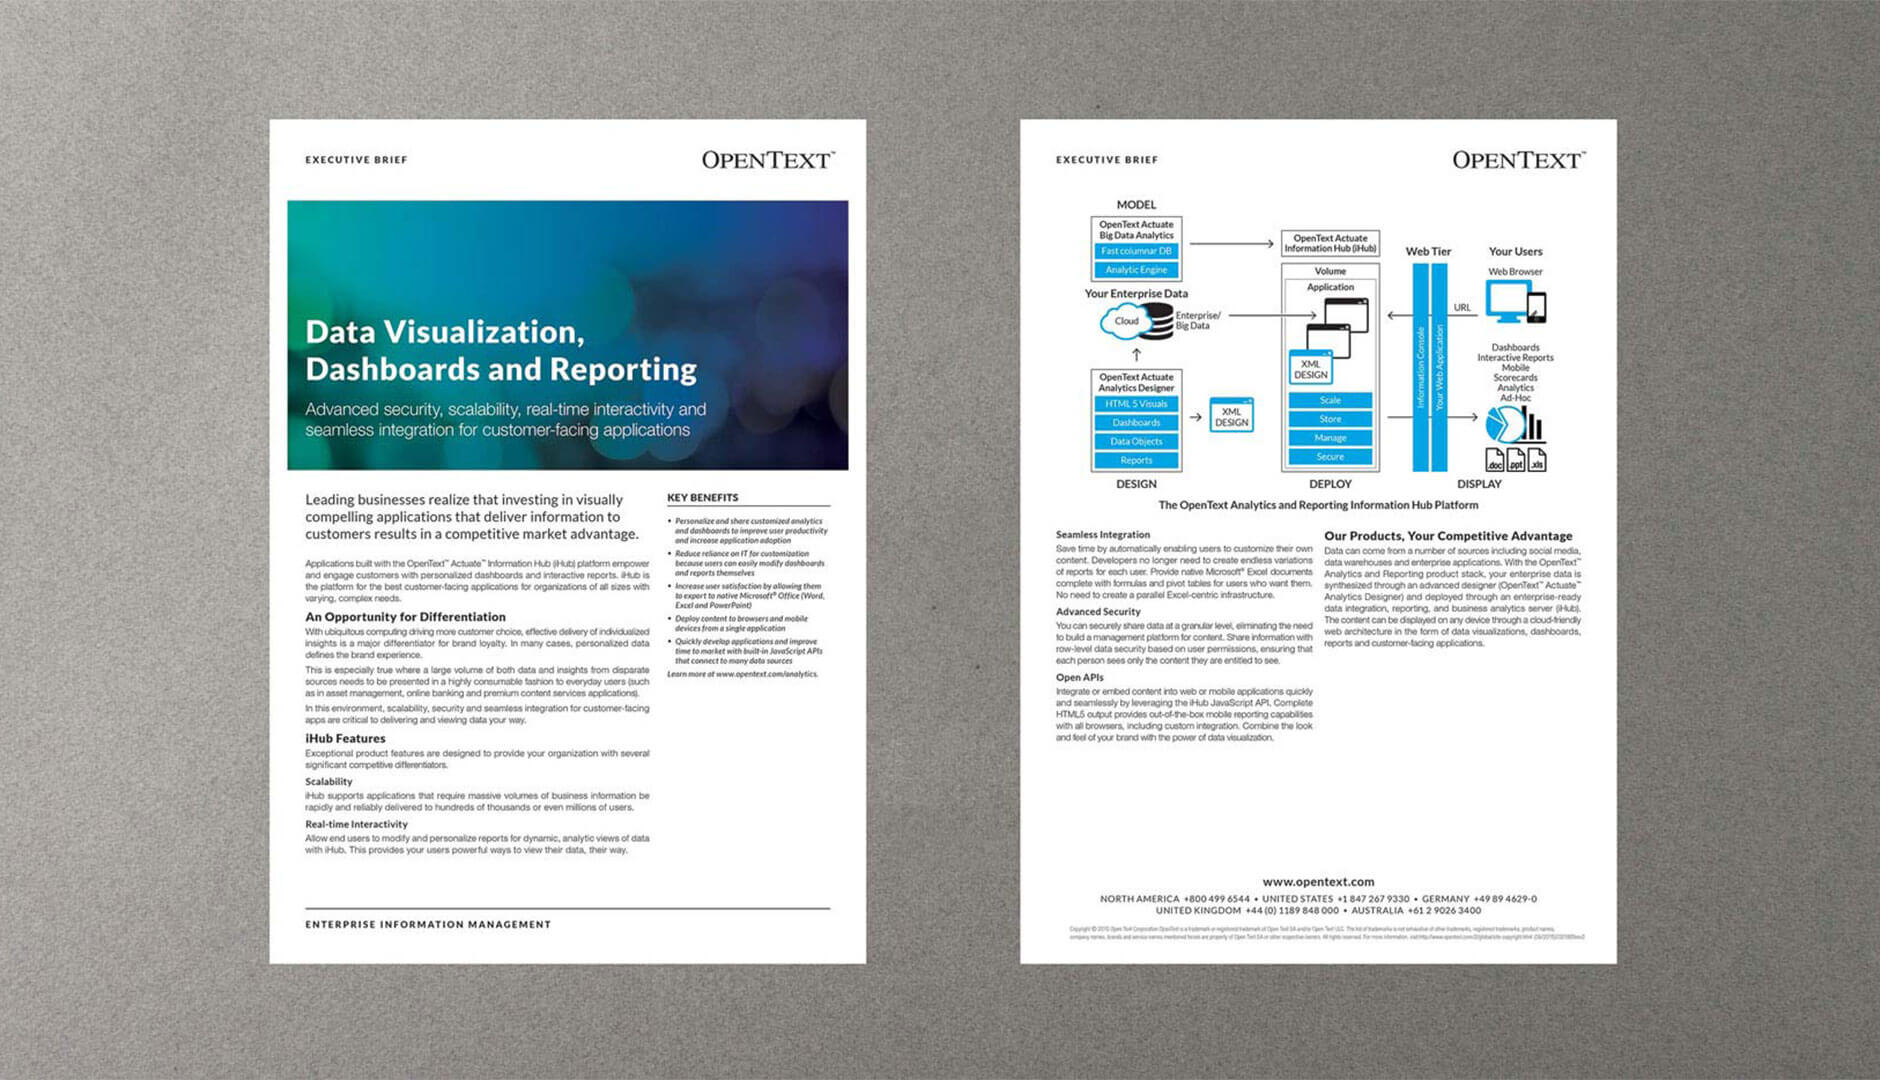 OpenText Collateral Image 4